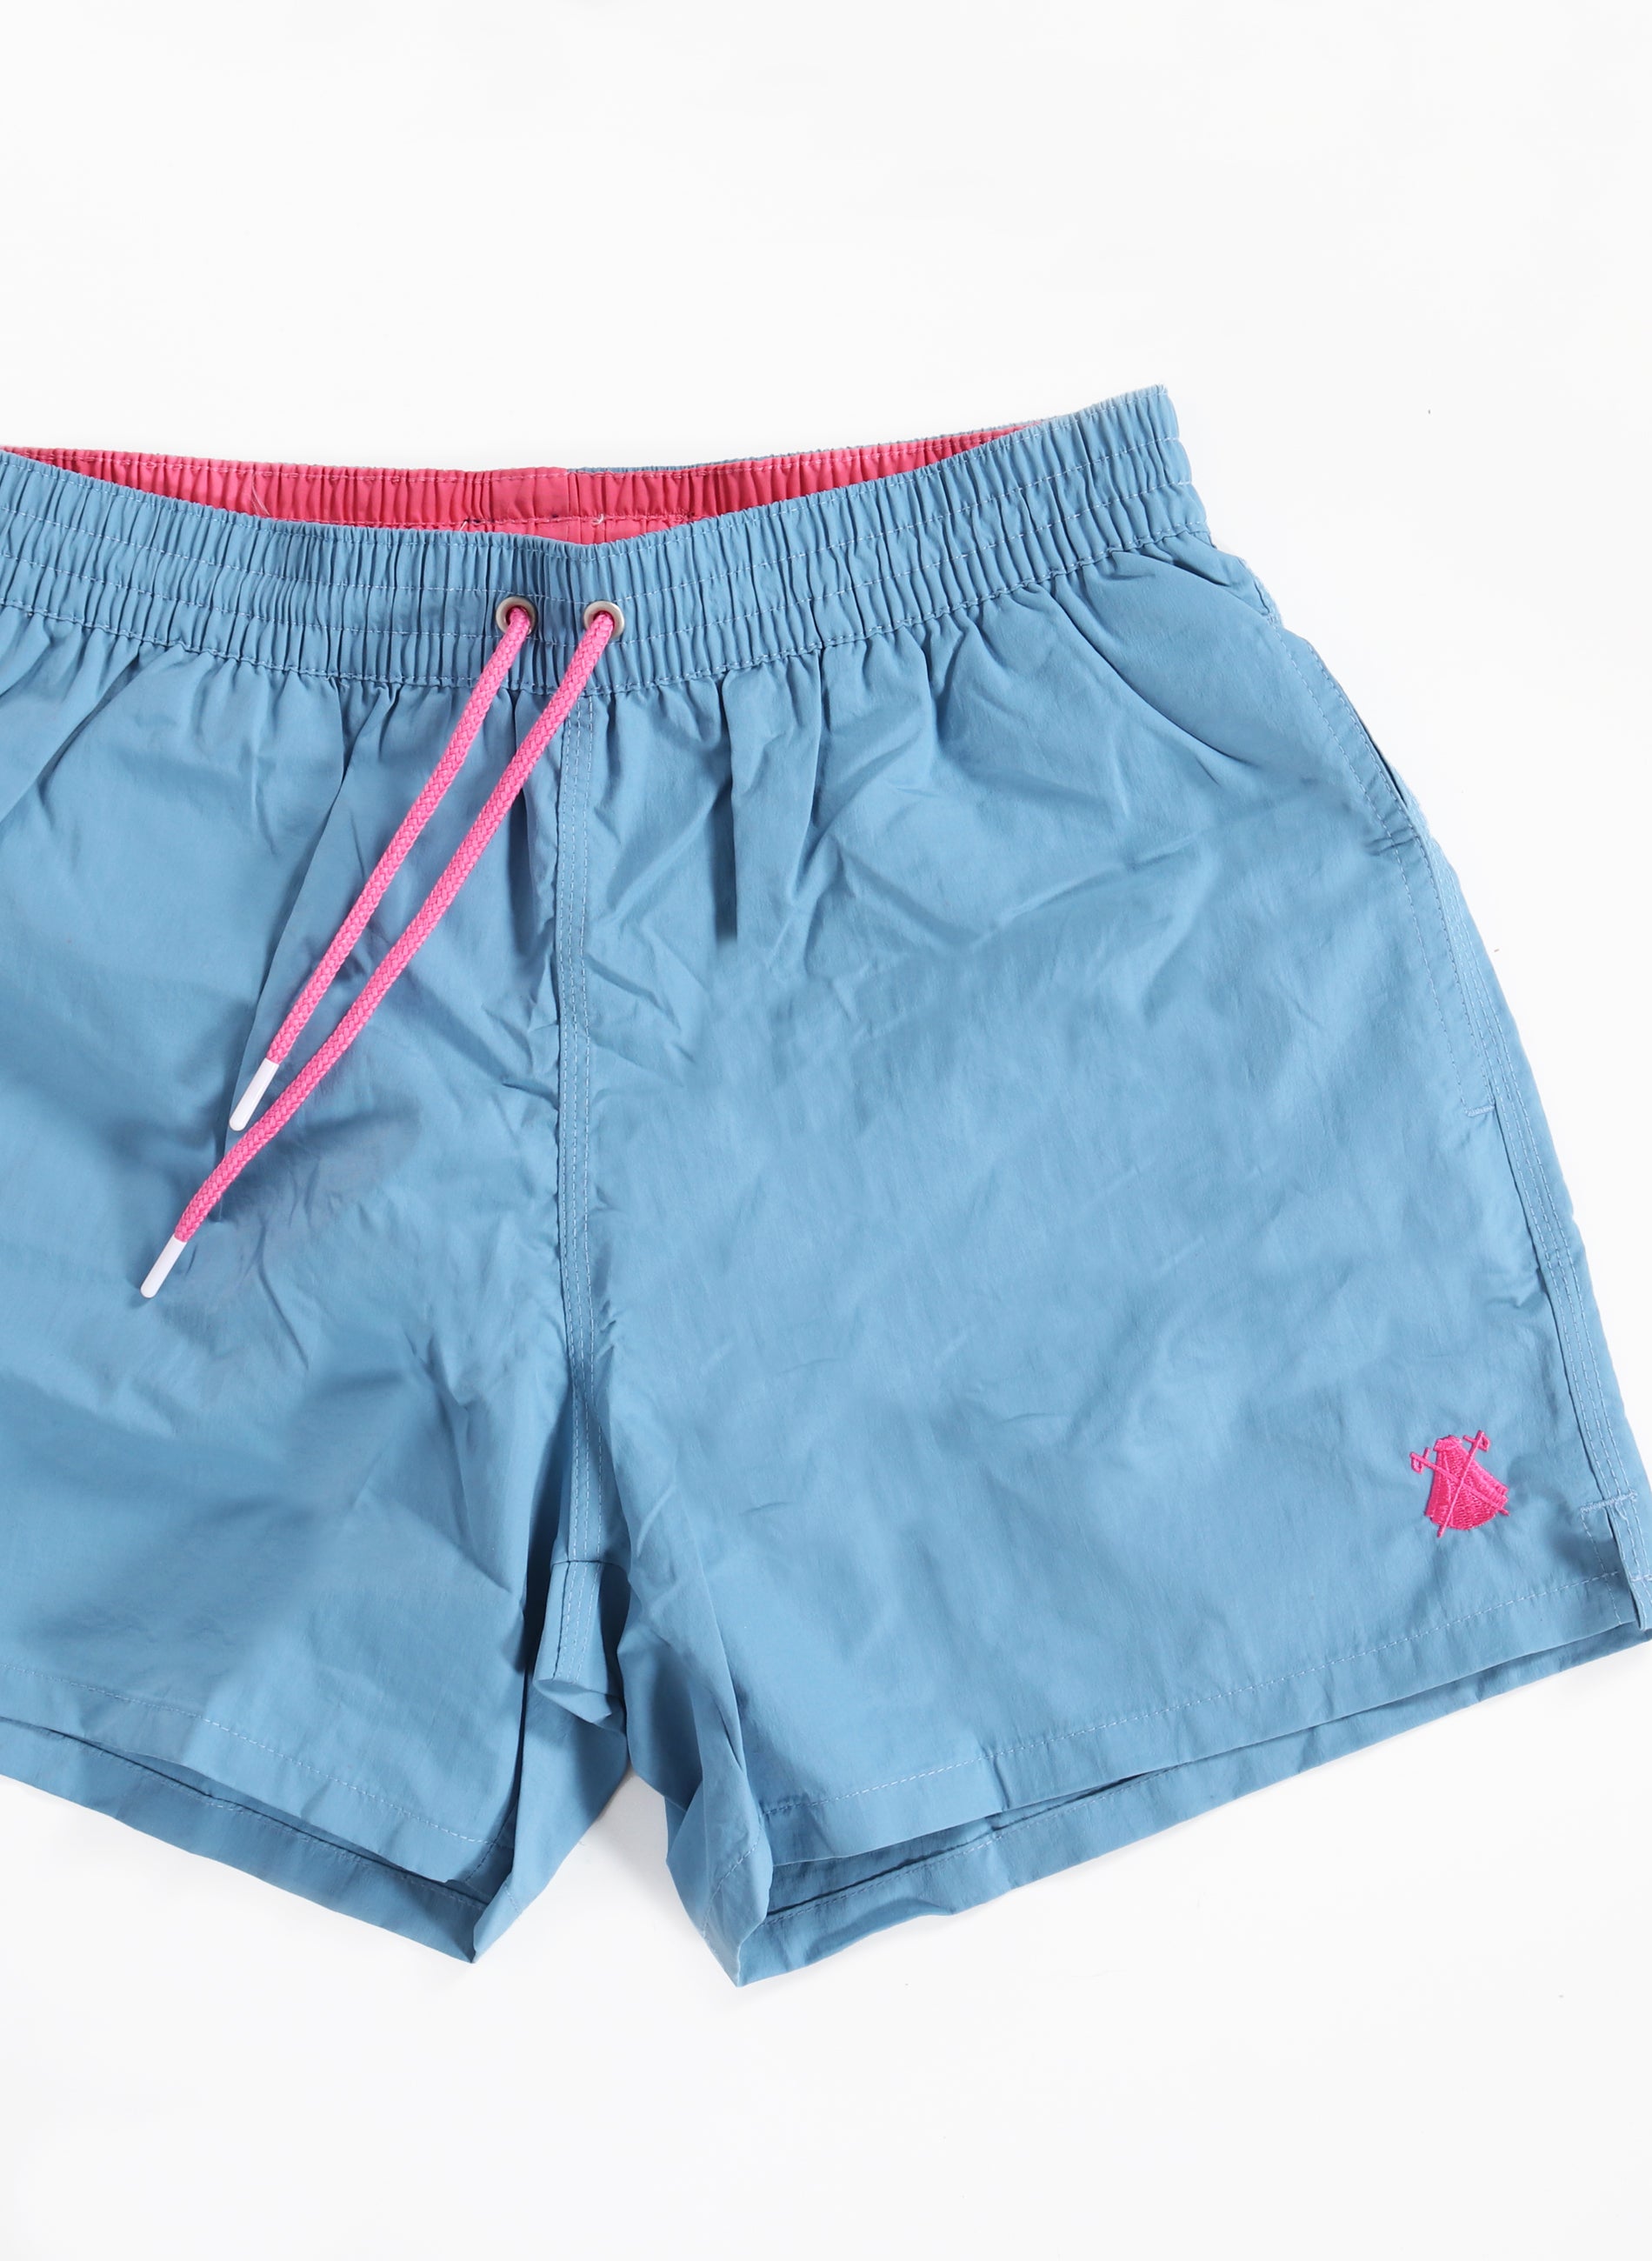 Light Blue Swimsuit with Pink details for Man